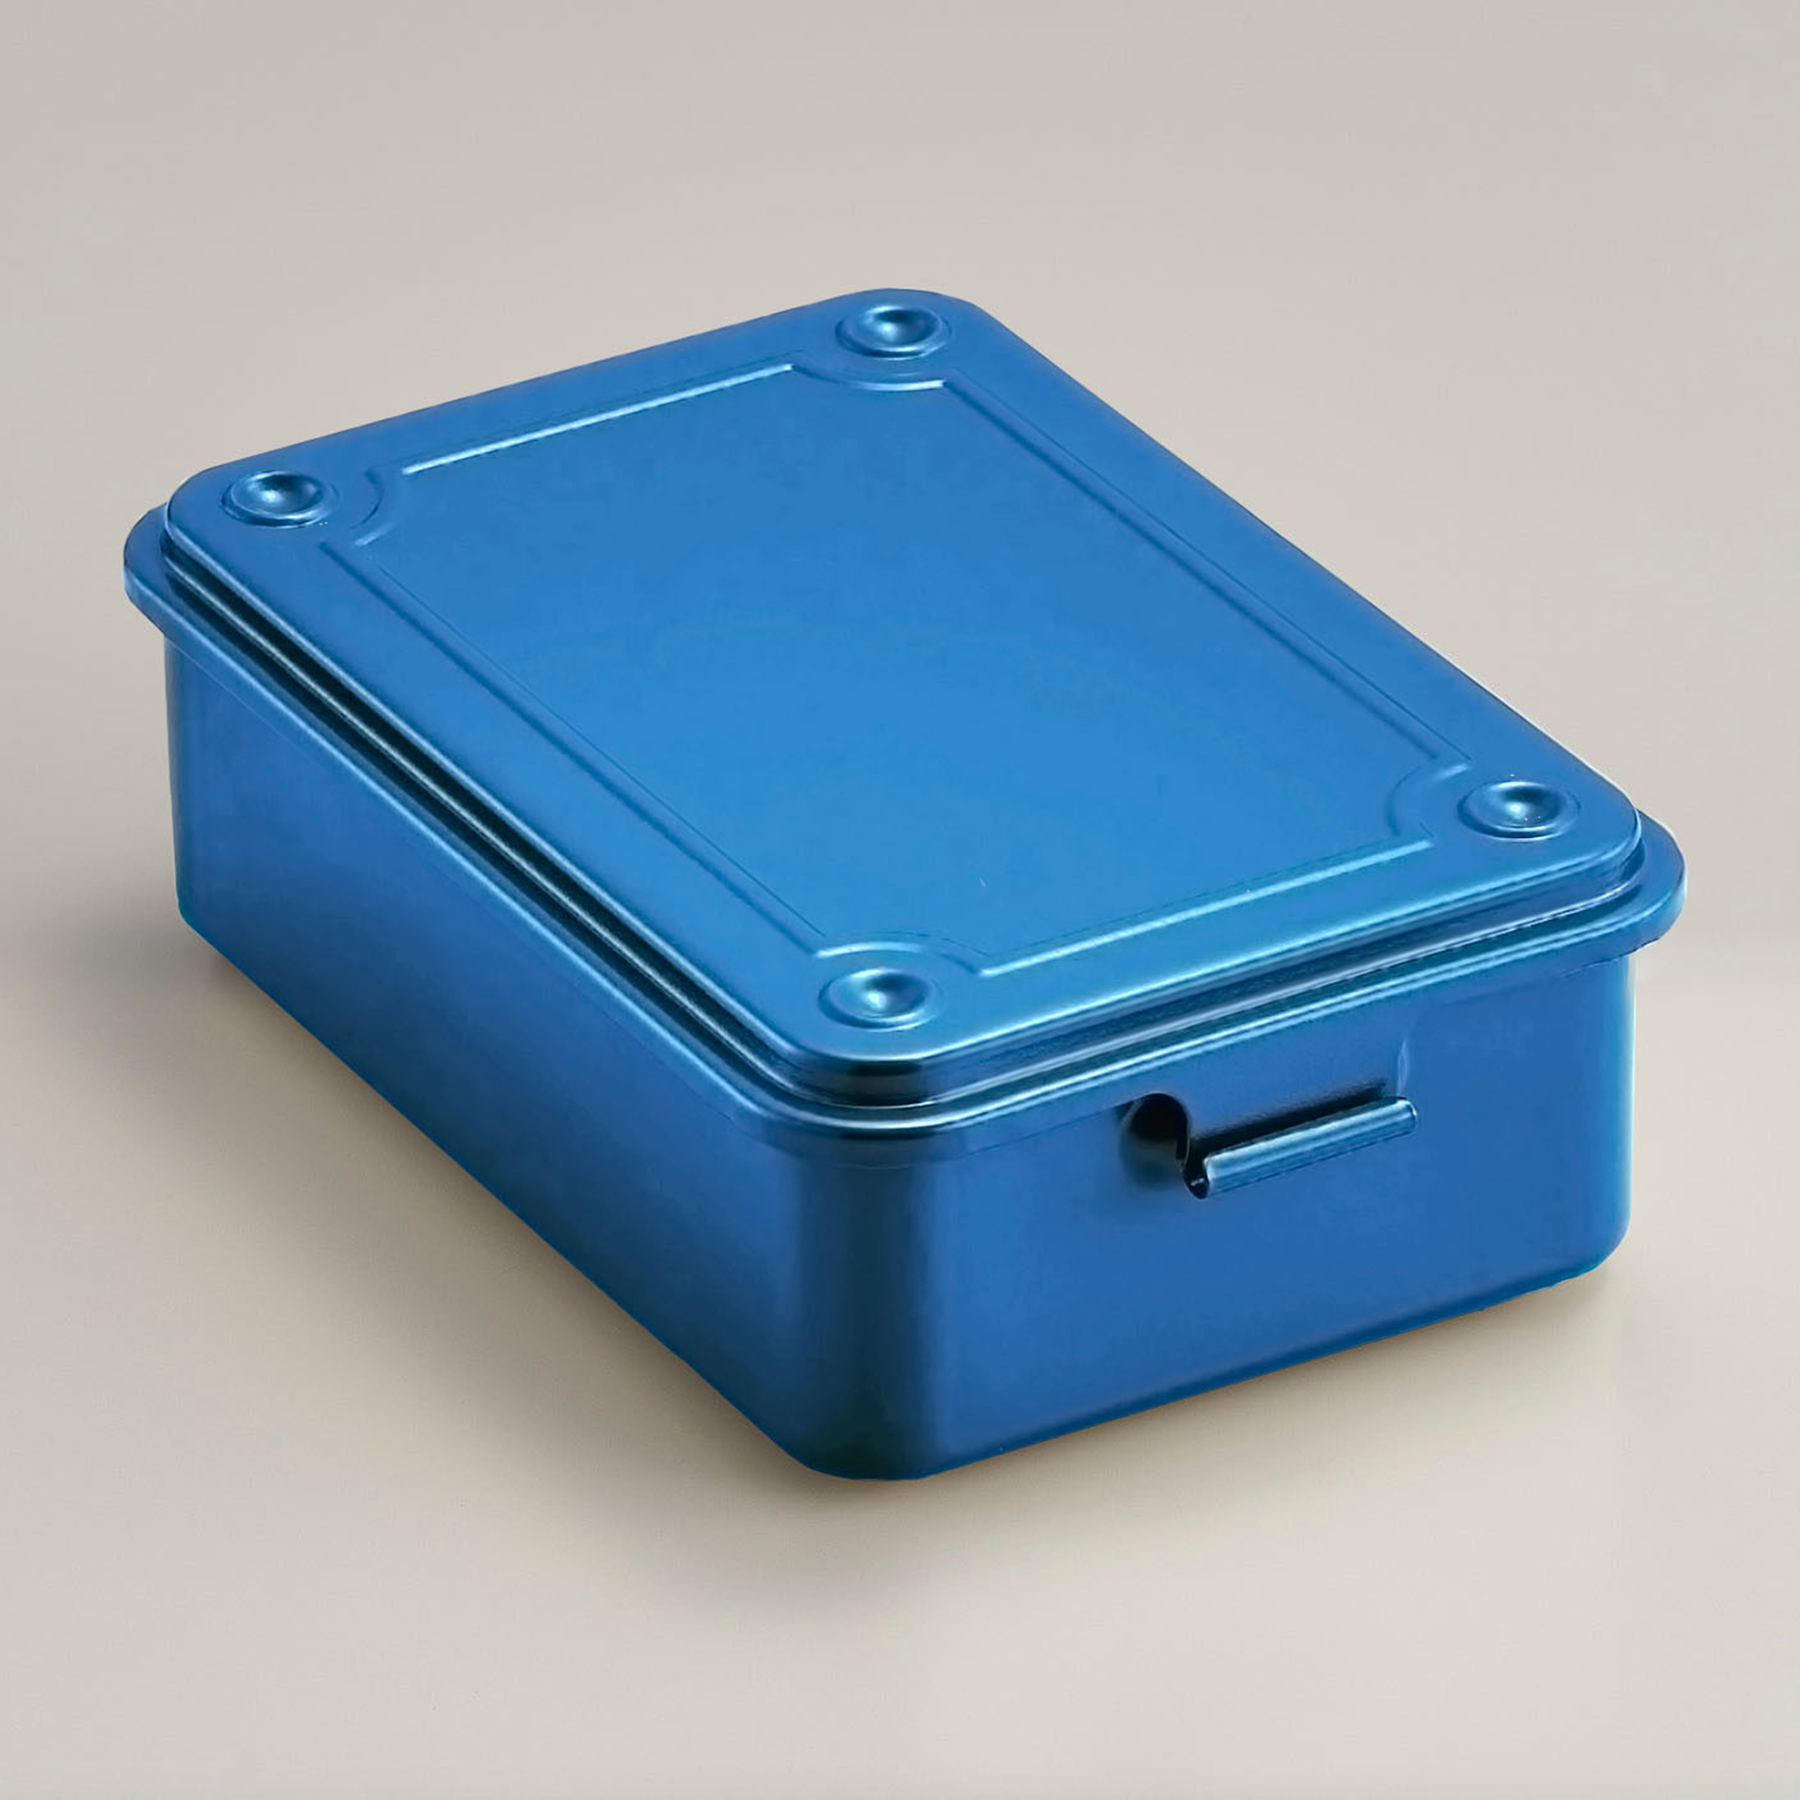 Toyo Steel Stackable Storage Box - Military Green